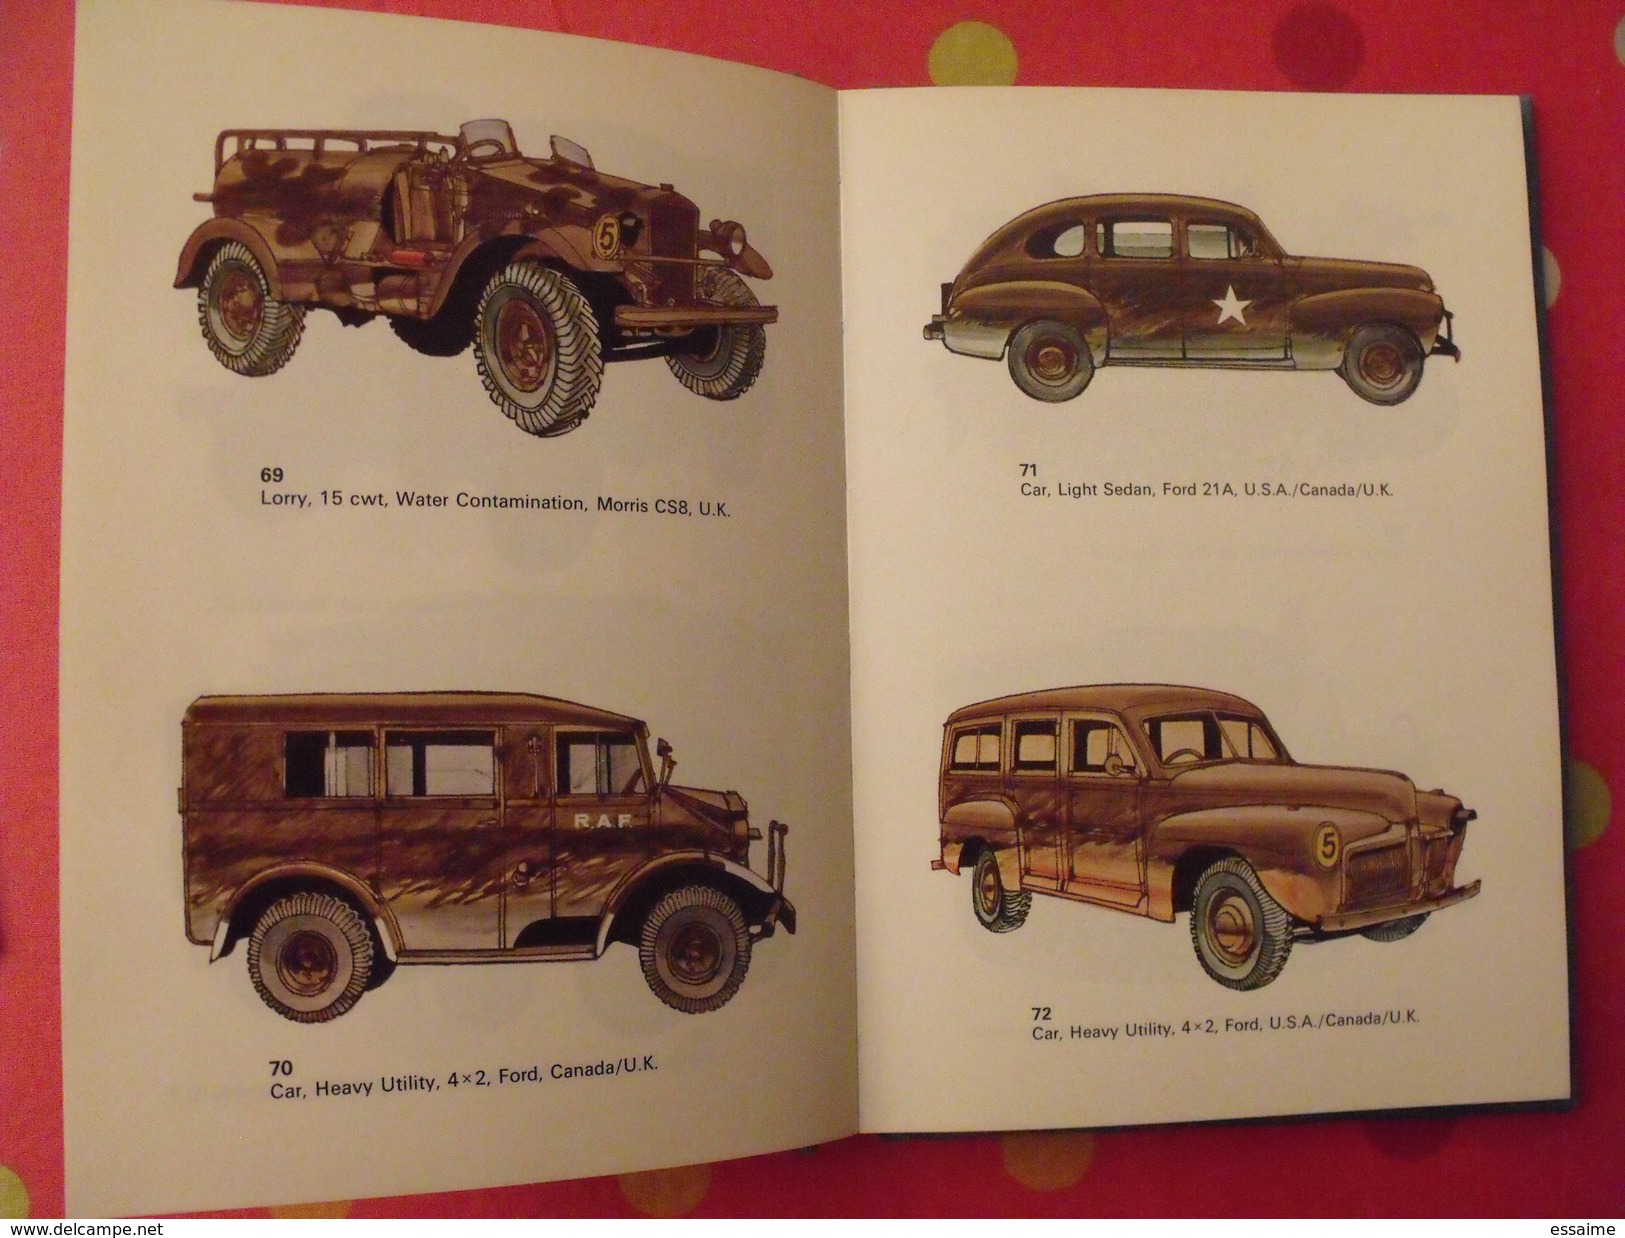 military transport of world war II. camions militaires. bishop. 1975. en anglais. guerre 39-45. blandford